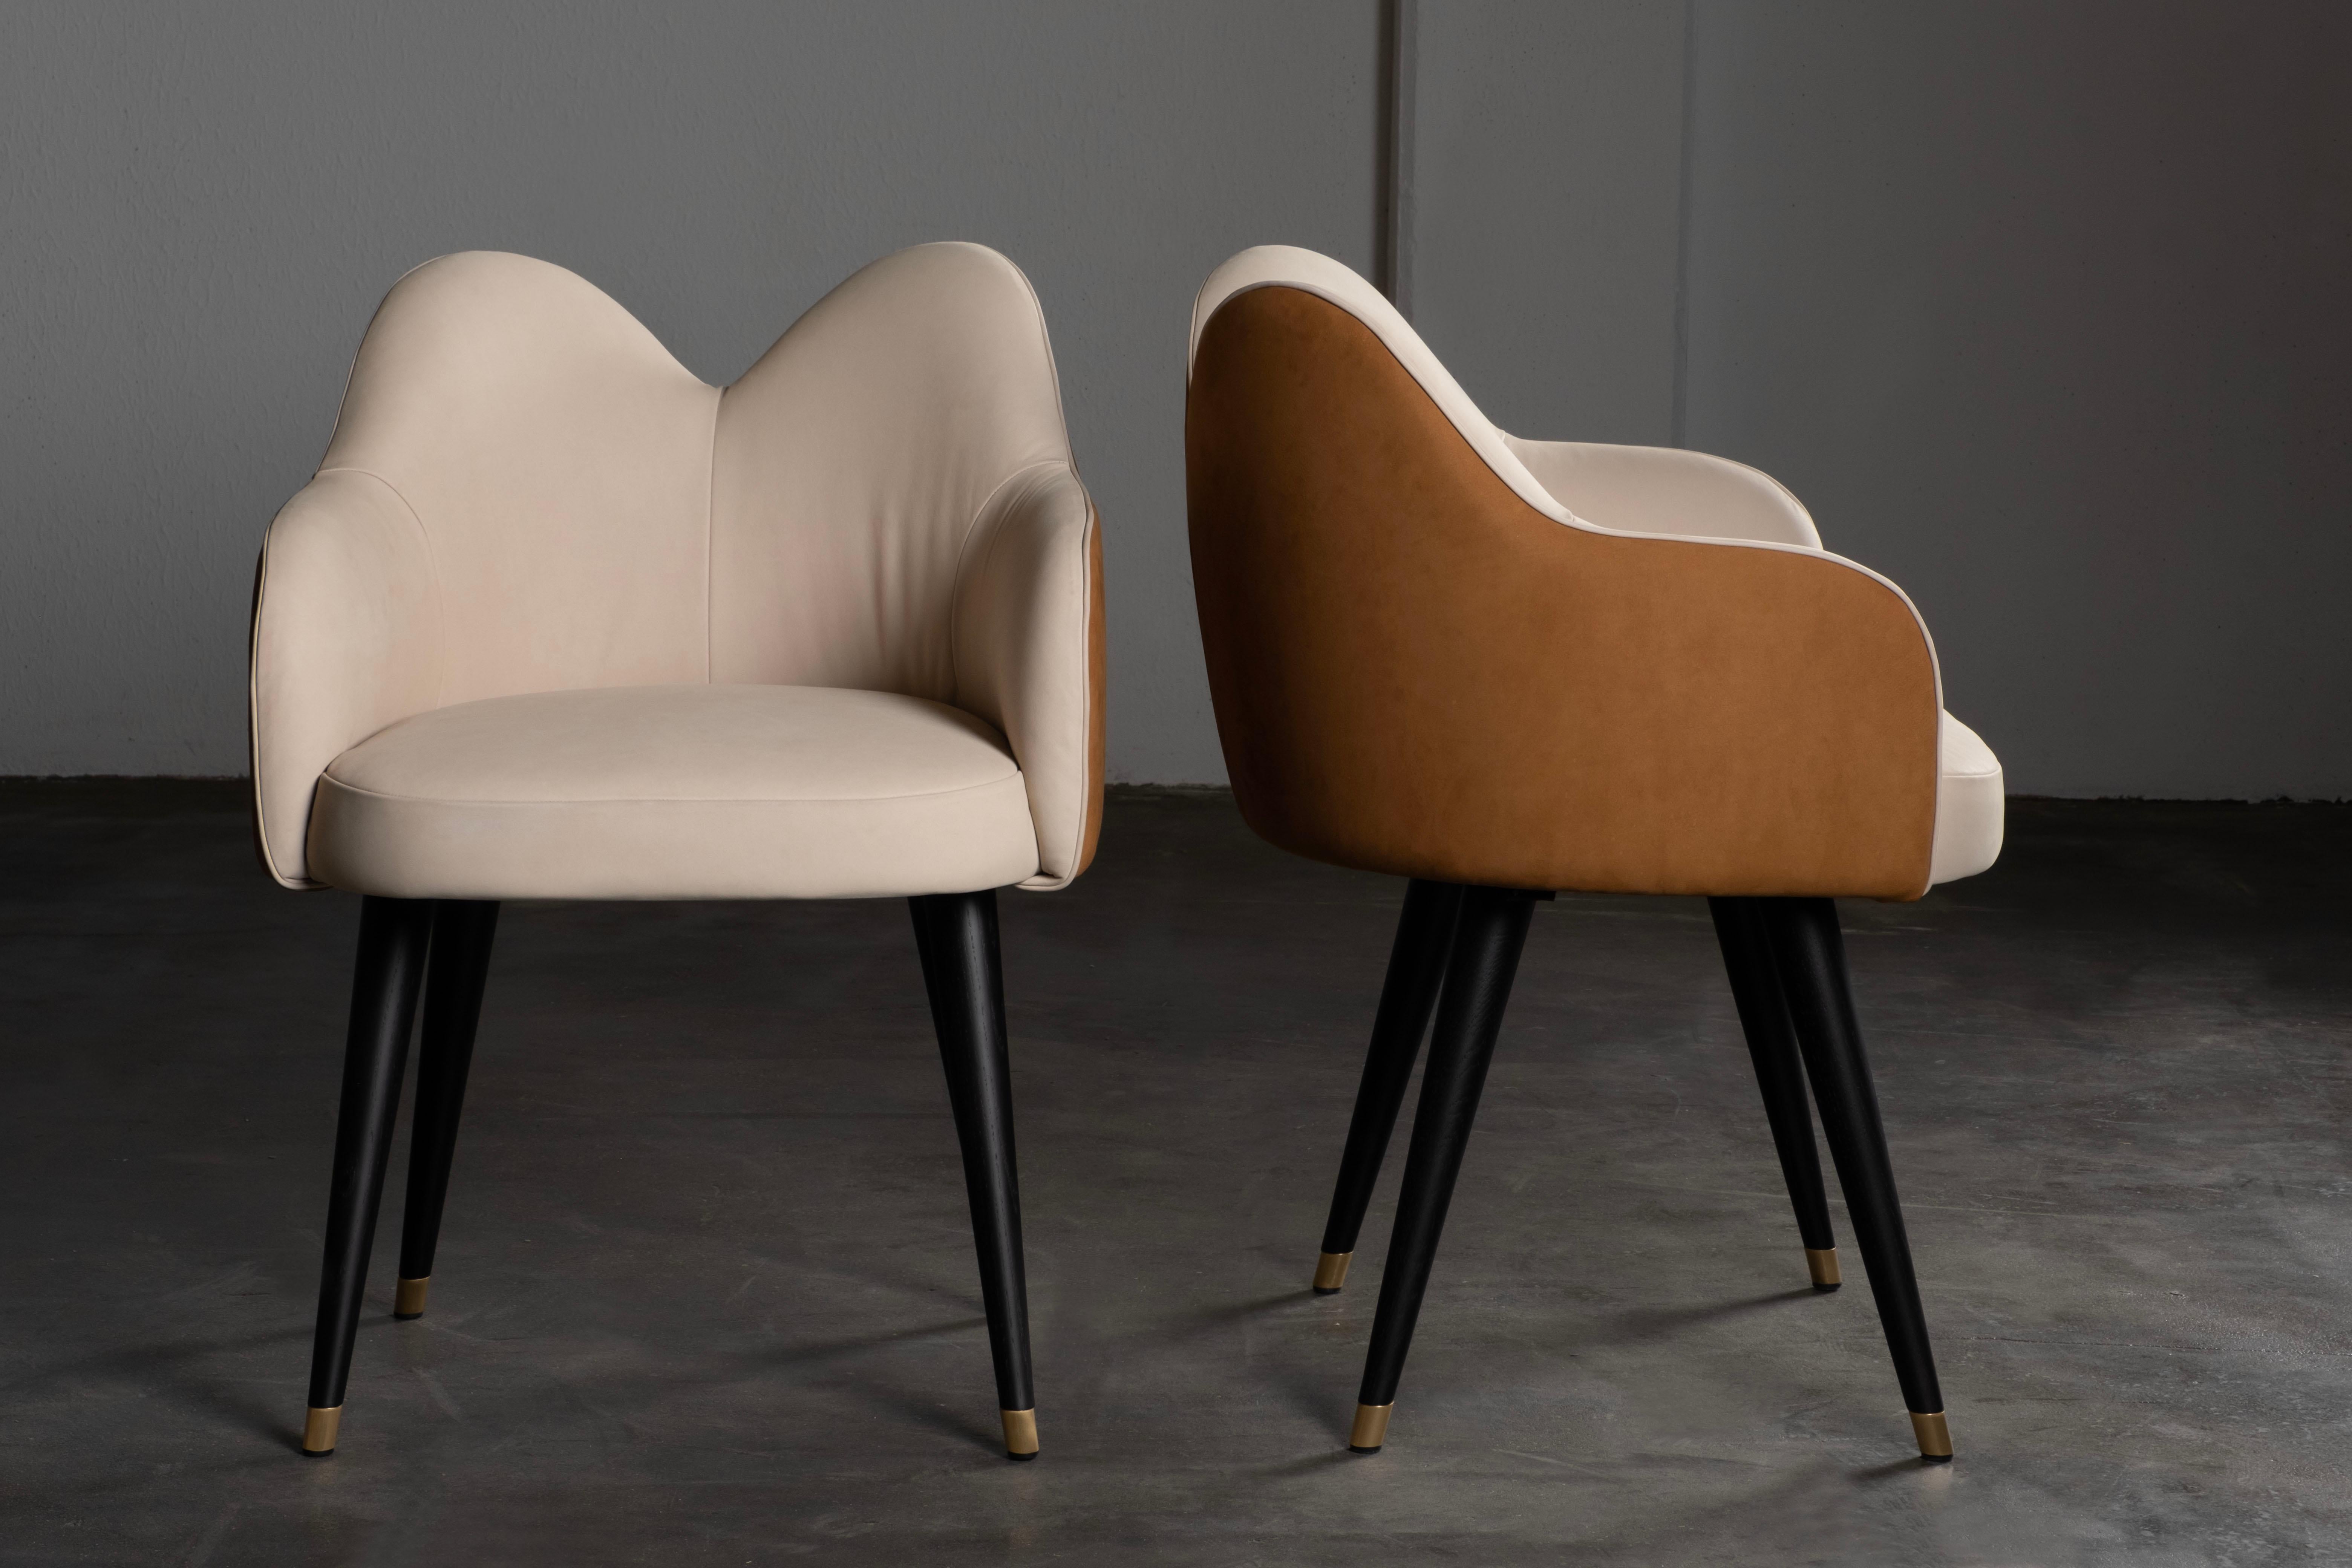 Hand-Crafted Modern Mary Dining Chairs, Beige Velvet Leather, Handmade Portugal by Greenapple For Sale